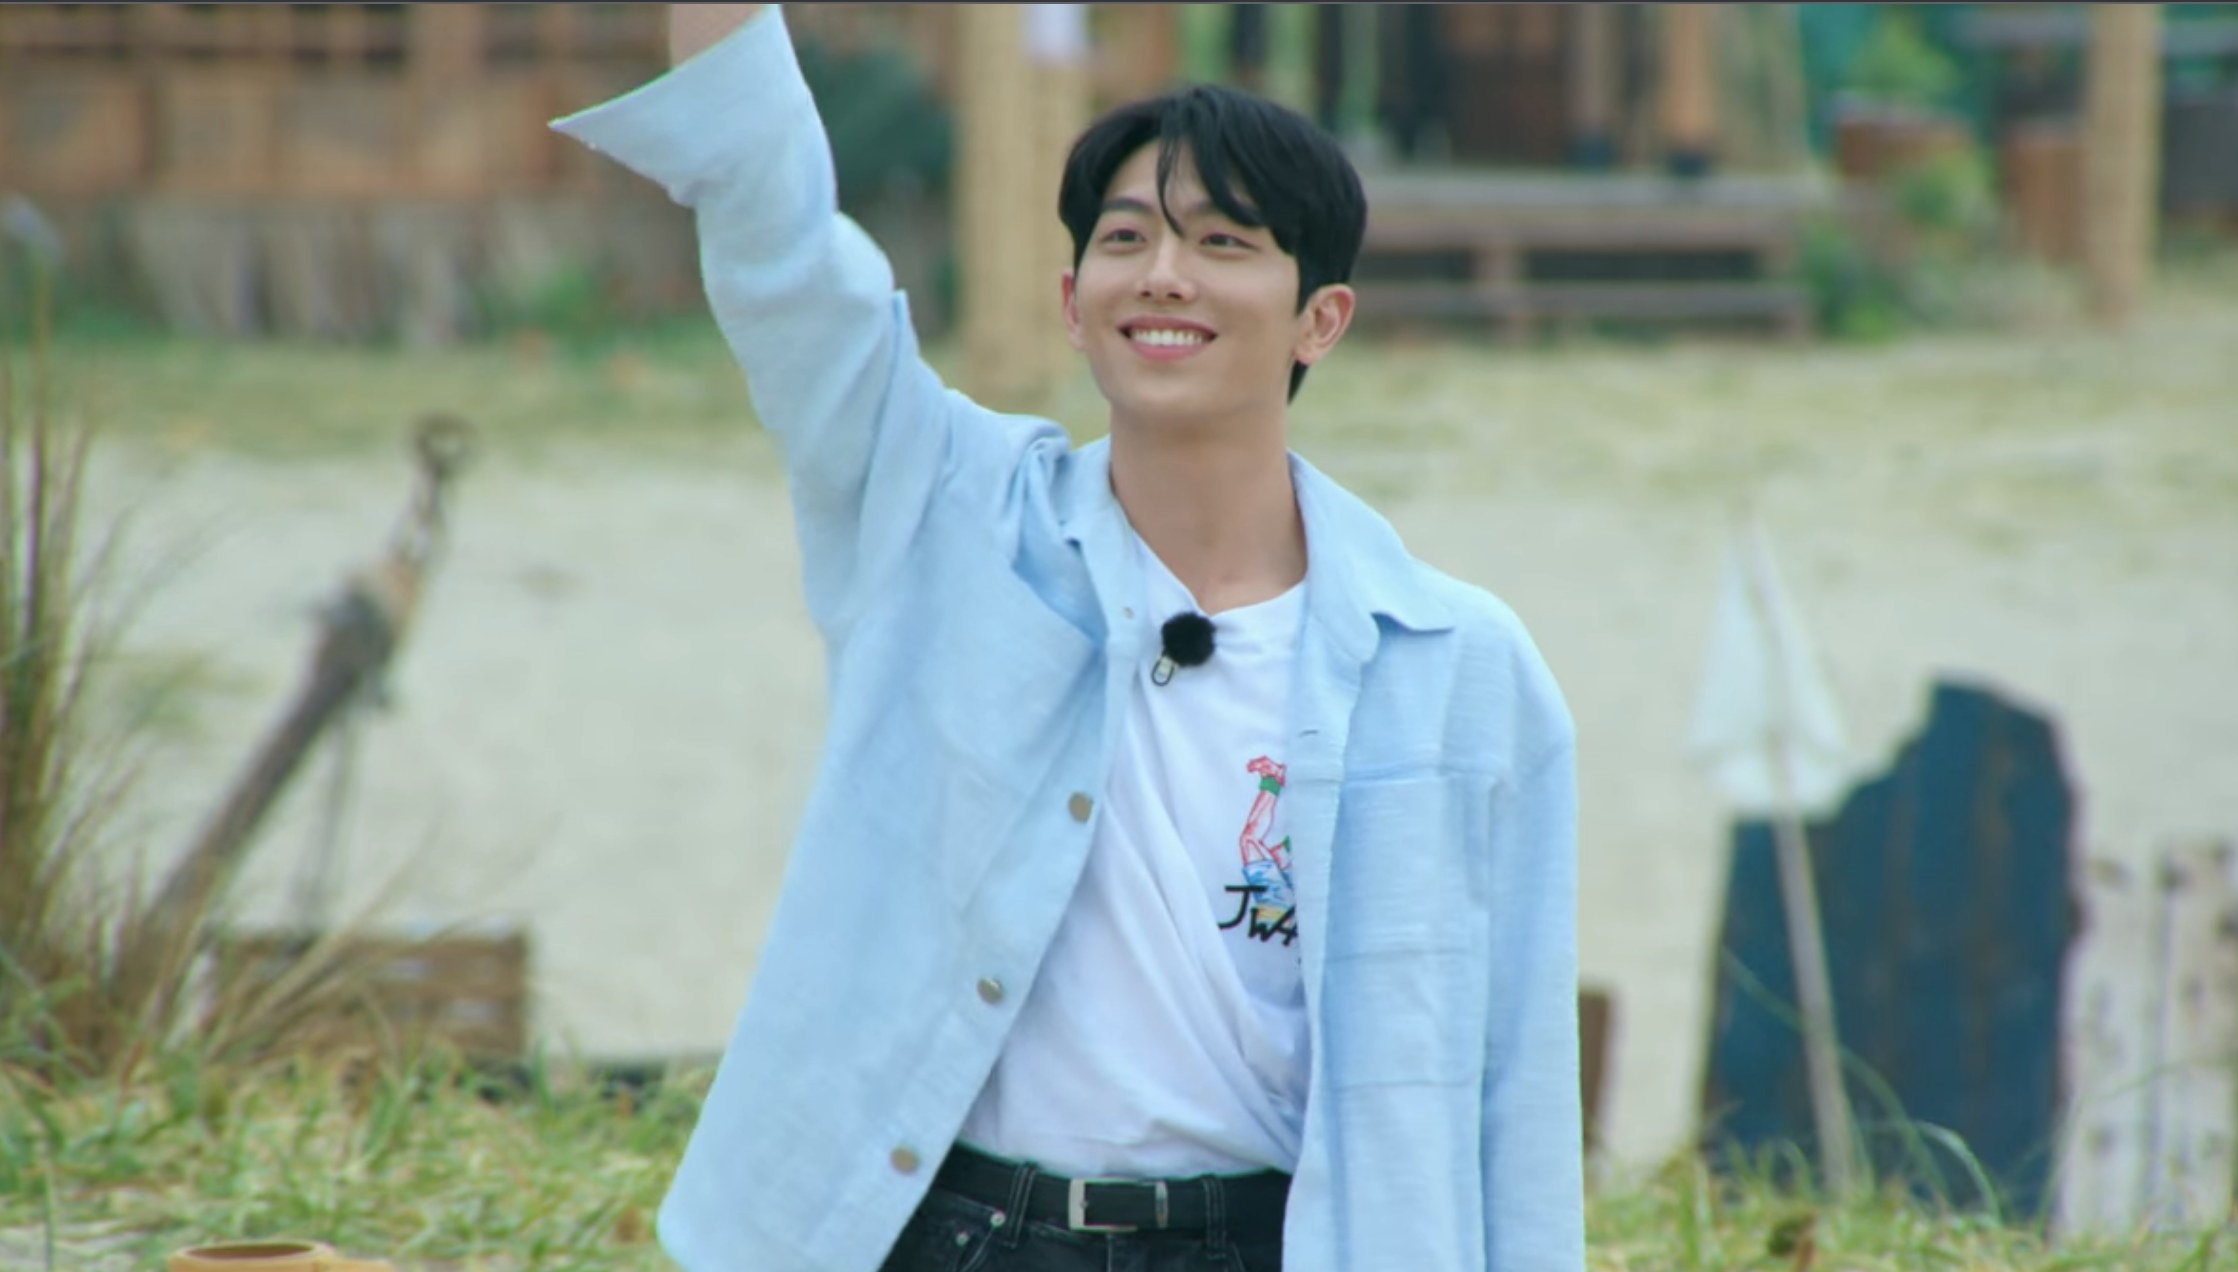 Han-bin smiles and waves enthusiastically